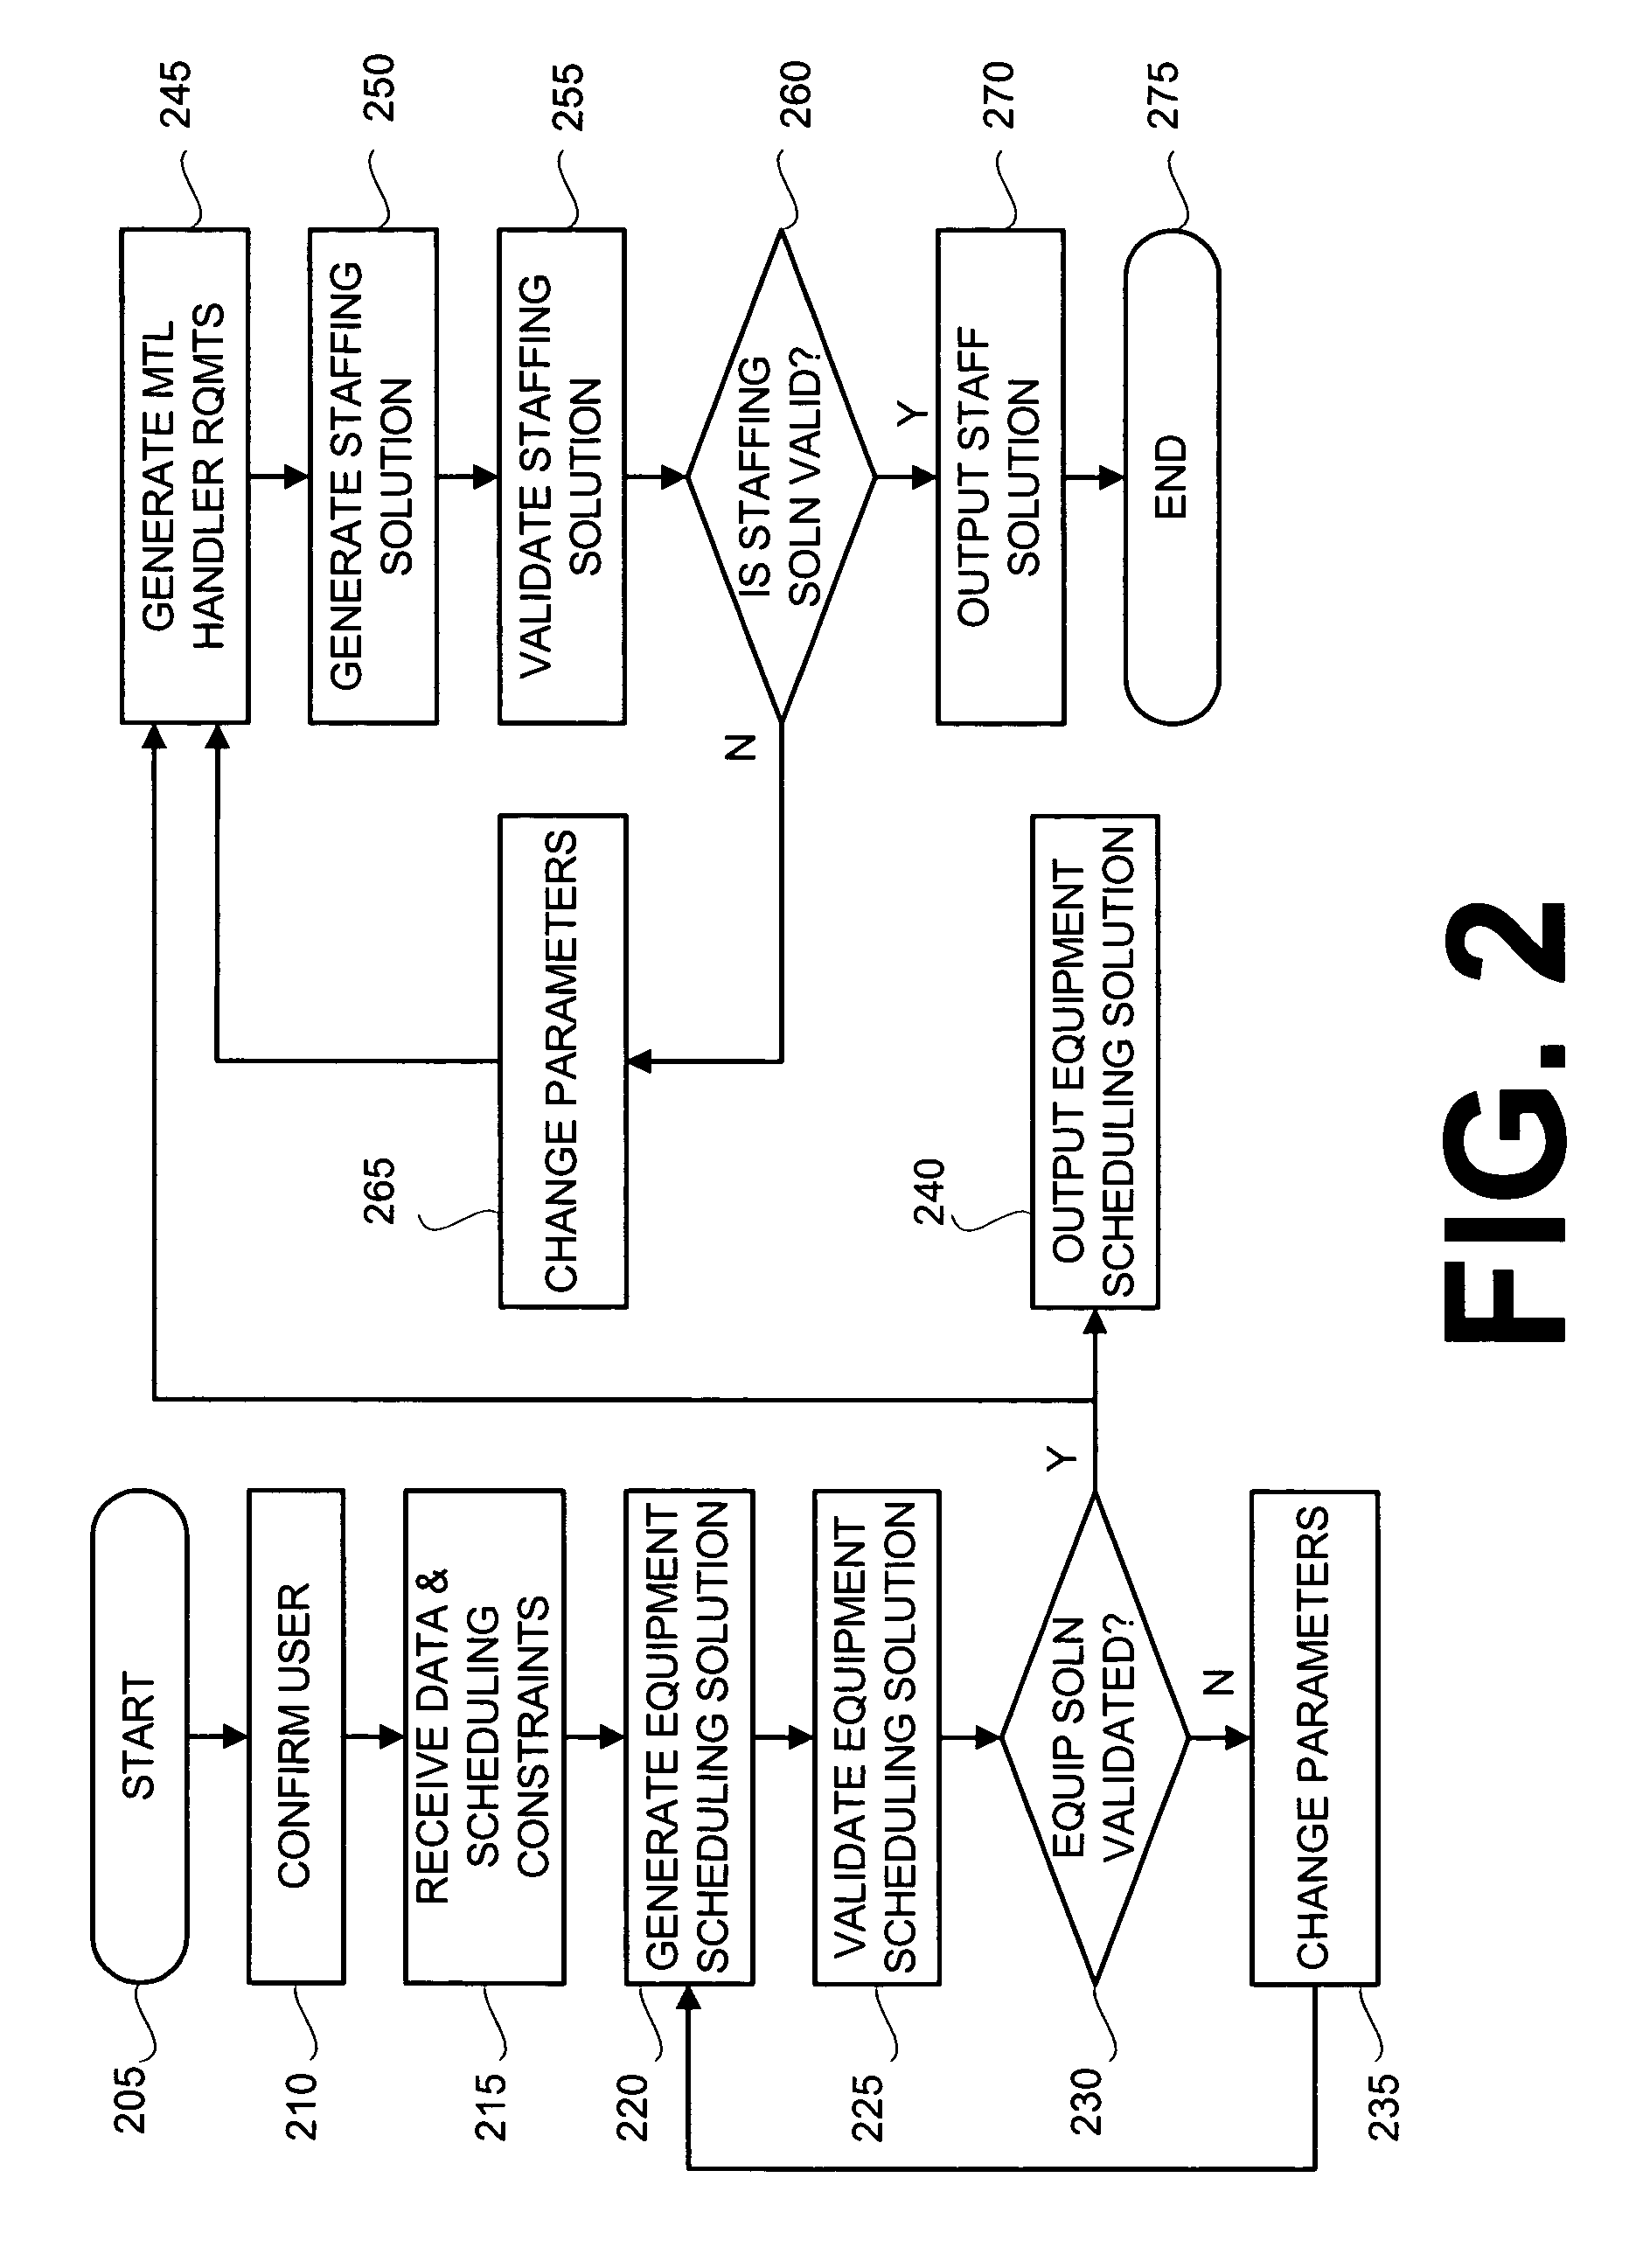 System and method for optimizing equipment schedules